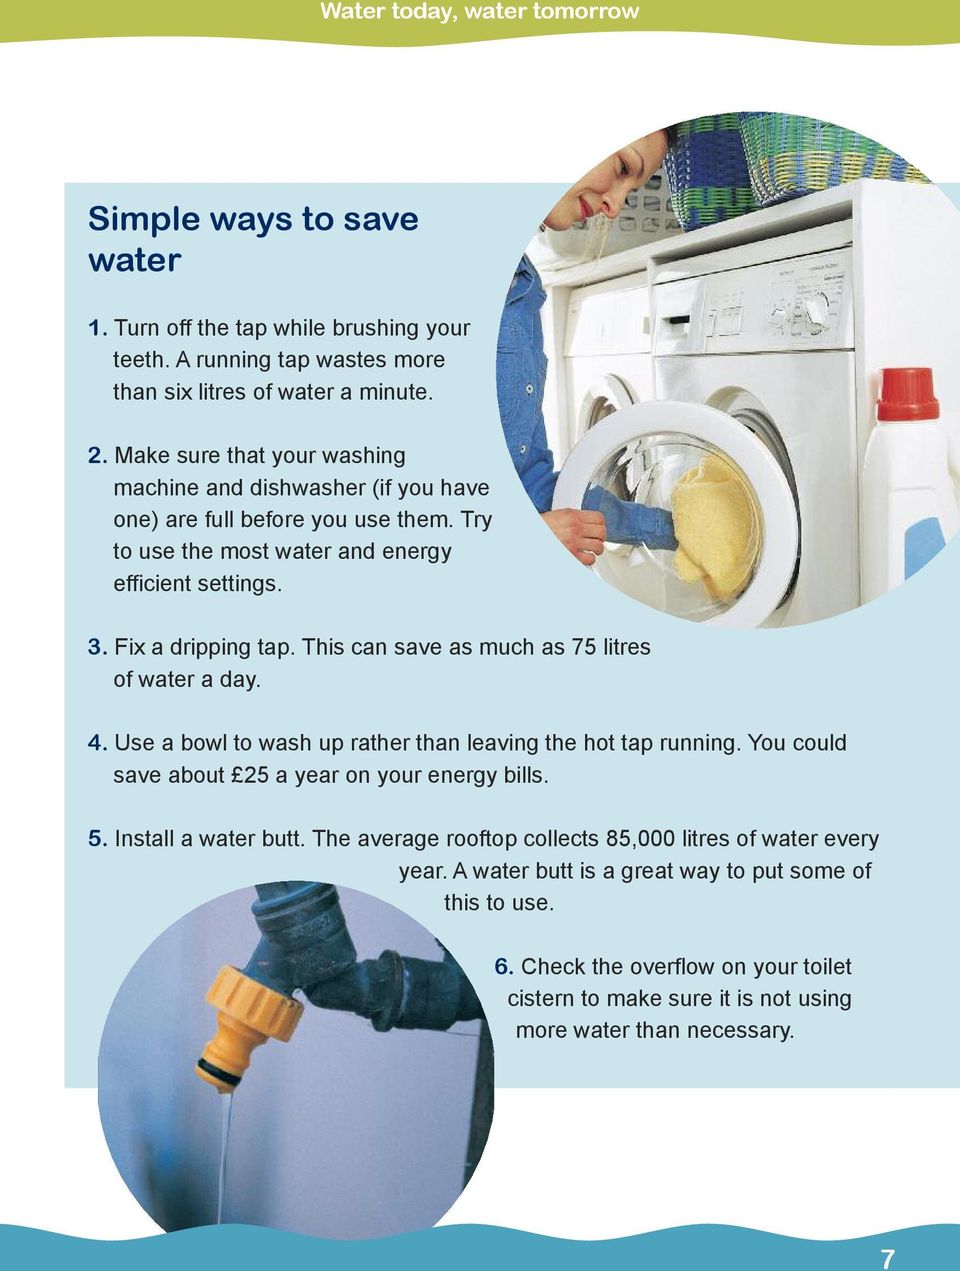 This can save as much as 75 litres of water a day. 4. Use a bowl to wash up rather than leaving the hot tap running. You could save about 25 a year on your energy bills. 5.